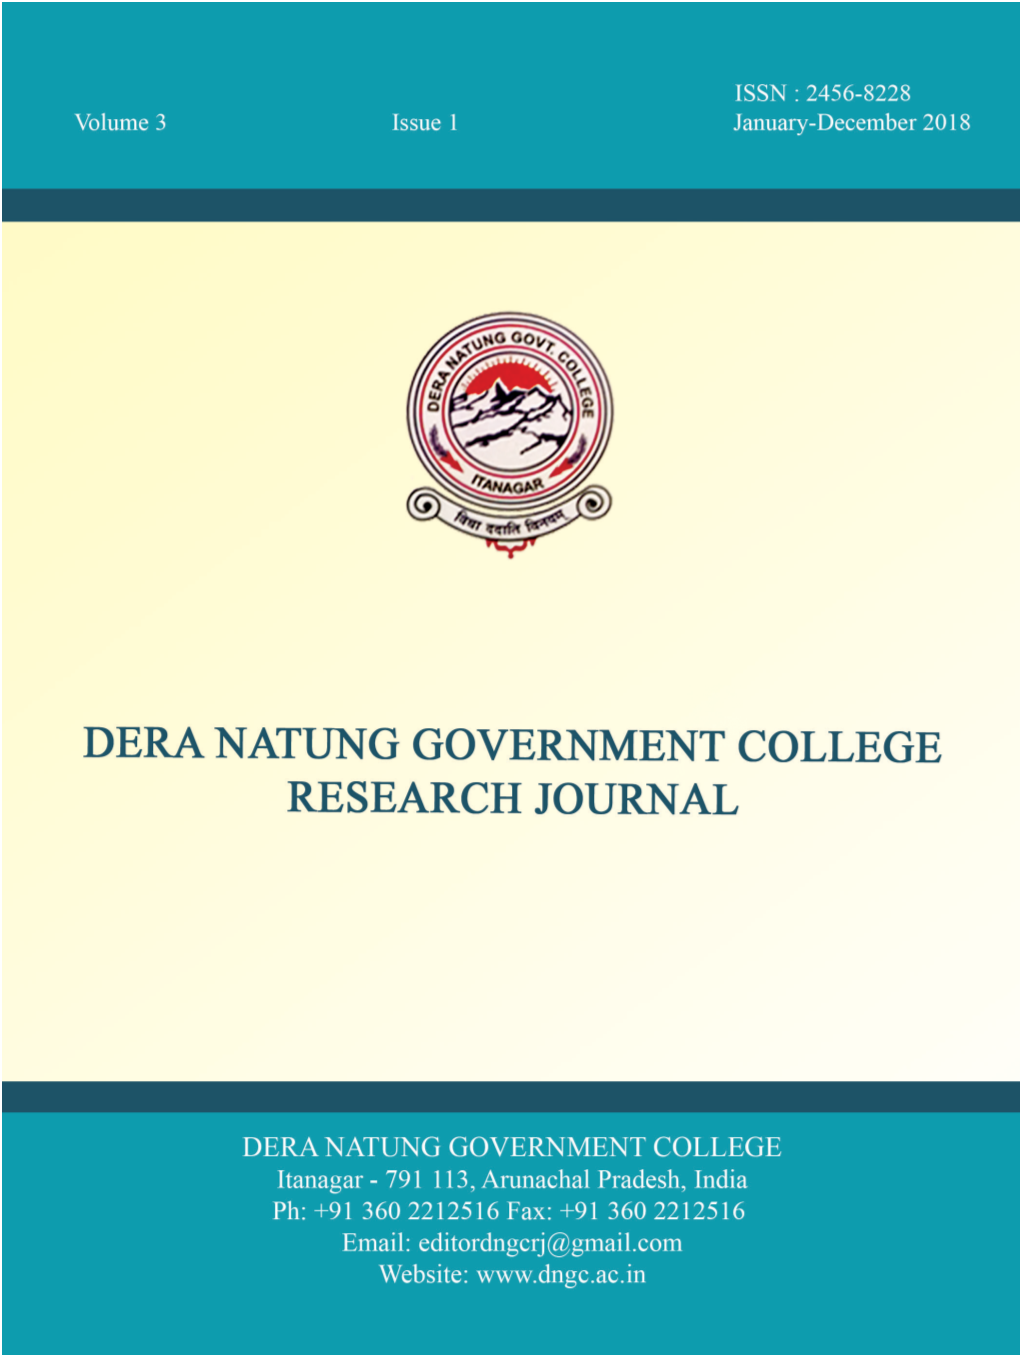 Dera Natung Government College Research Journal ISSN : 2456-8228 Volume 3 Issue 1 January-December 2018